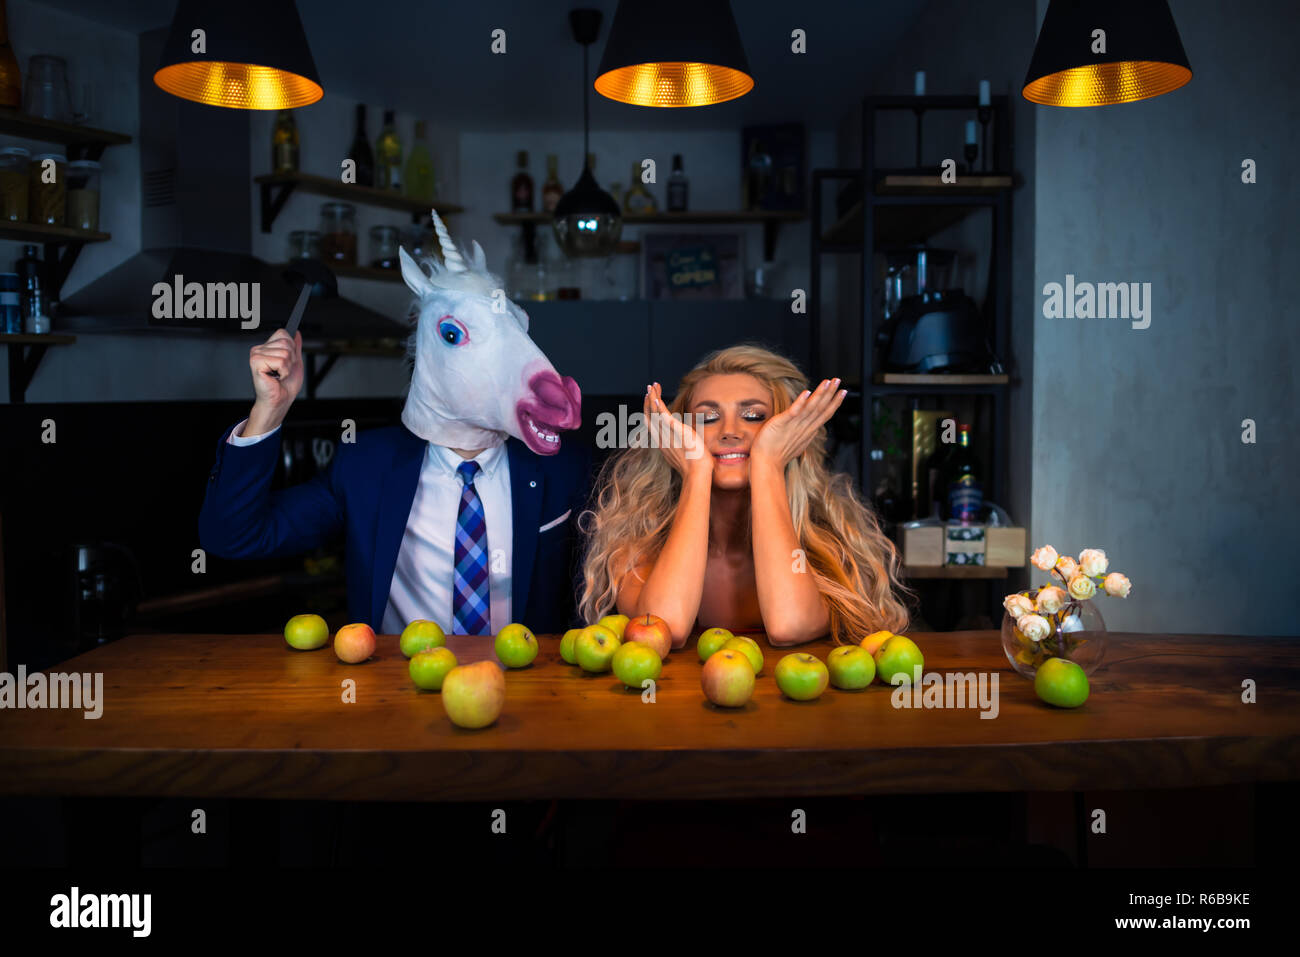 Funny couple playing at bar counter in kitchen with apples on table. Blonde girl have fun with boyfriend in mask. Unicorn in suit with young woman Stock Photo